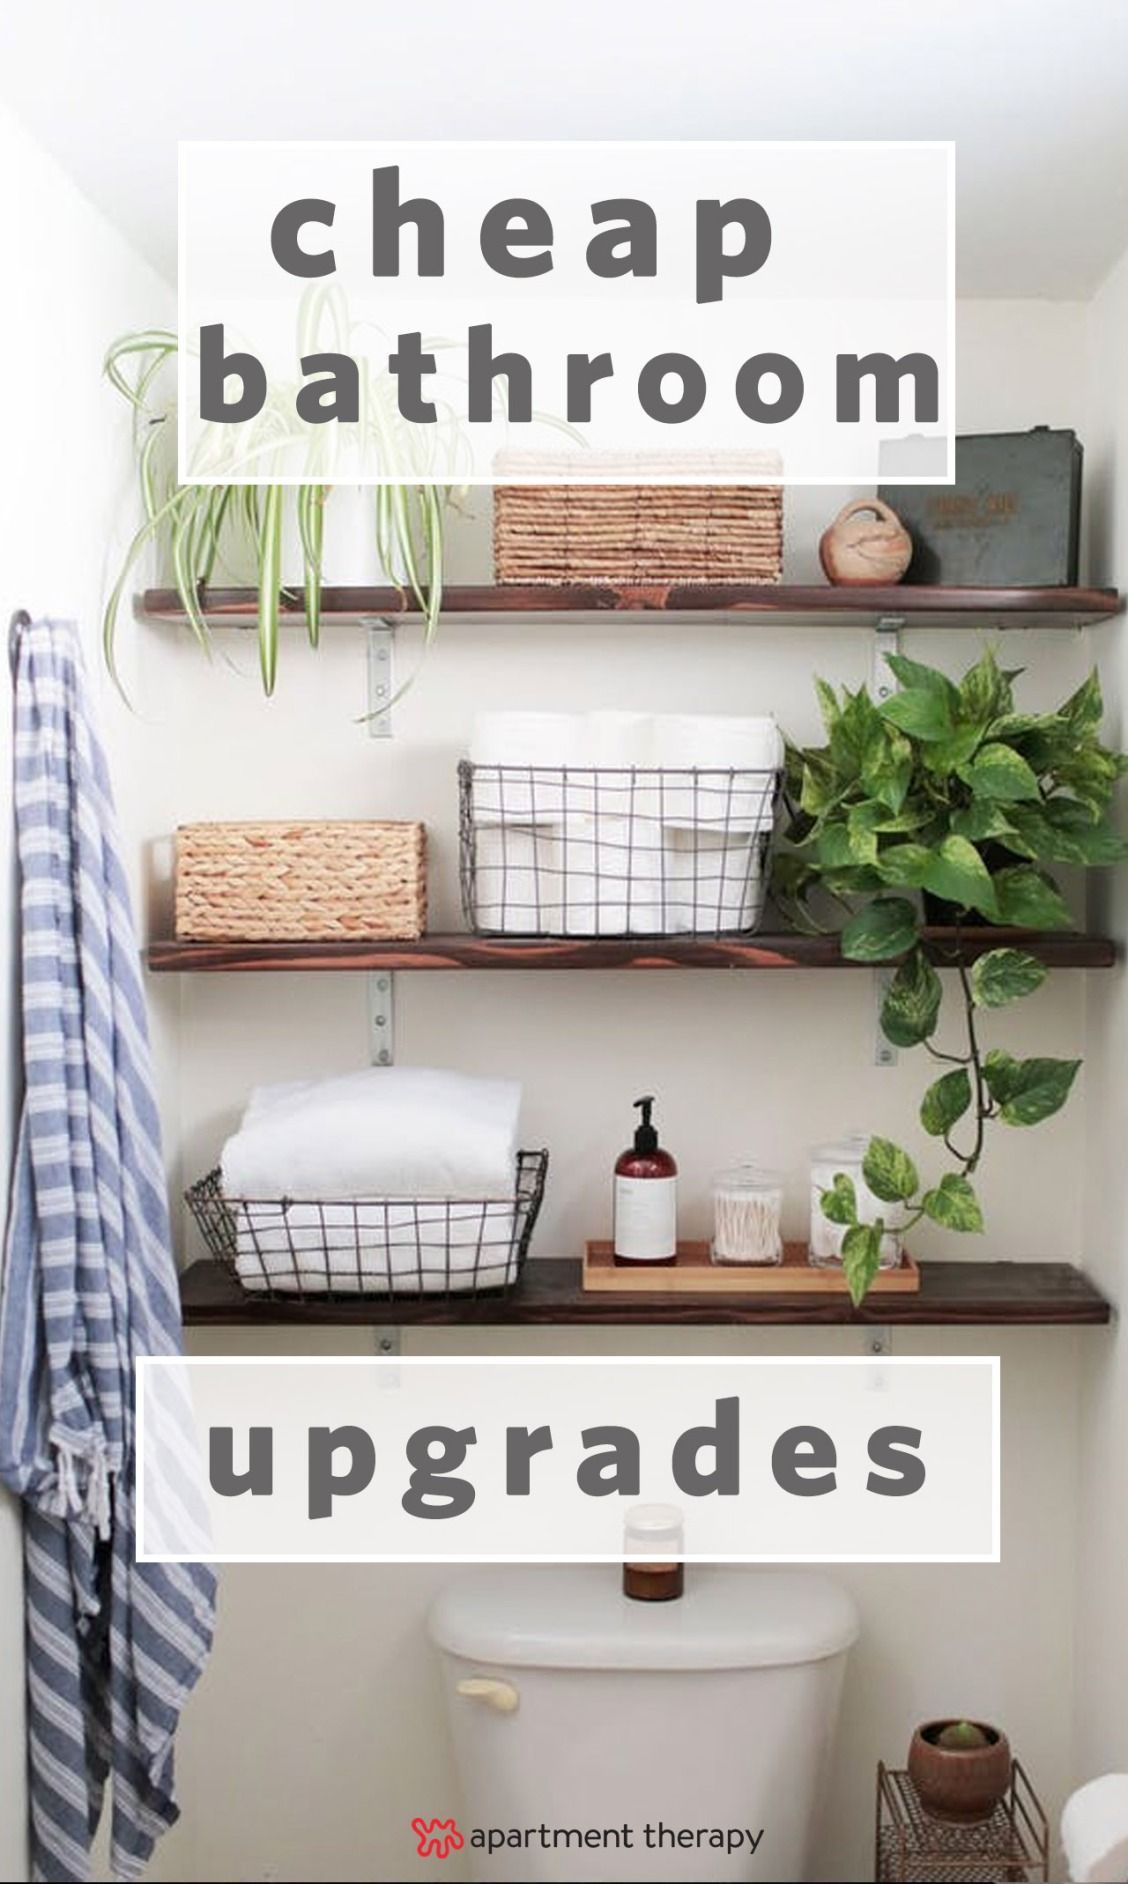 The Best Things You Can Do to Your Bathroom for Under $100 - The Best Things You Can Do to Your Bathroom for Under $100 -   17 diy Bathroom upgrades ideas